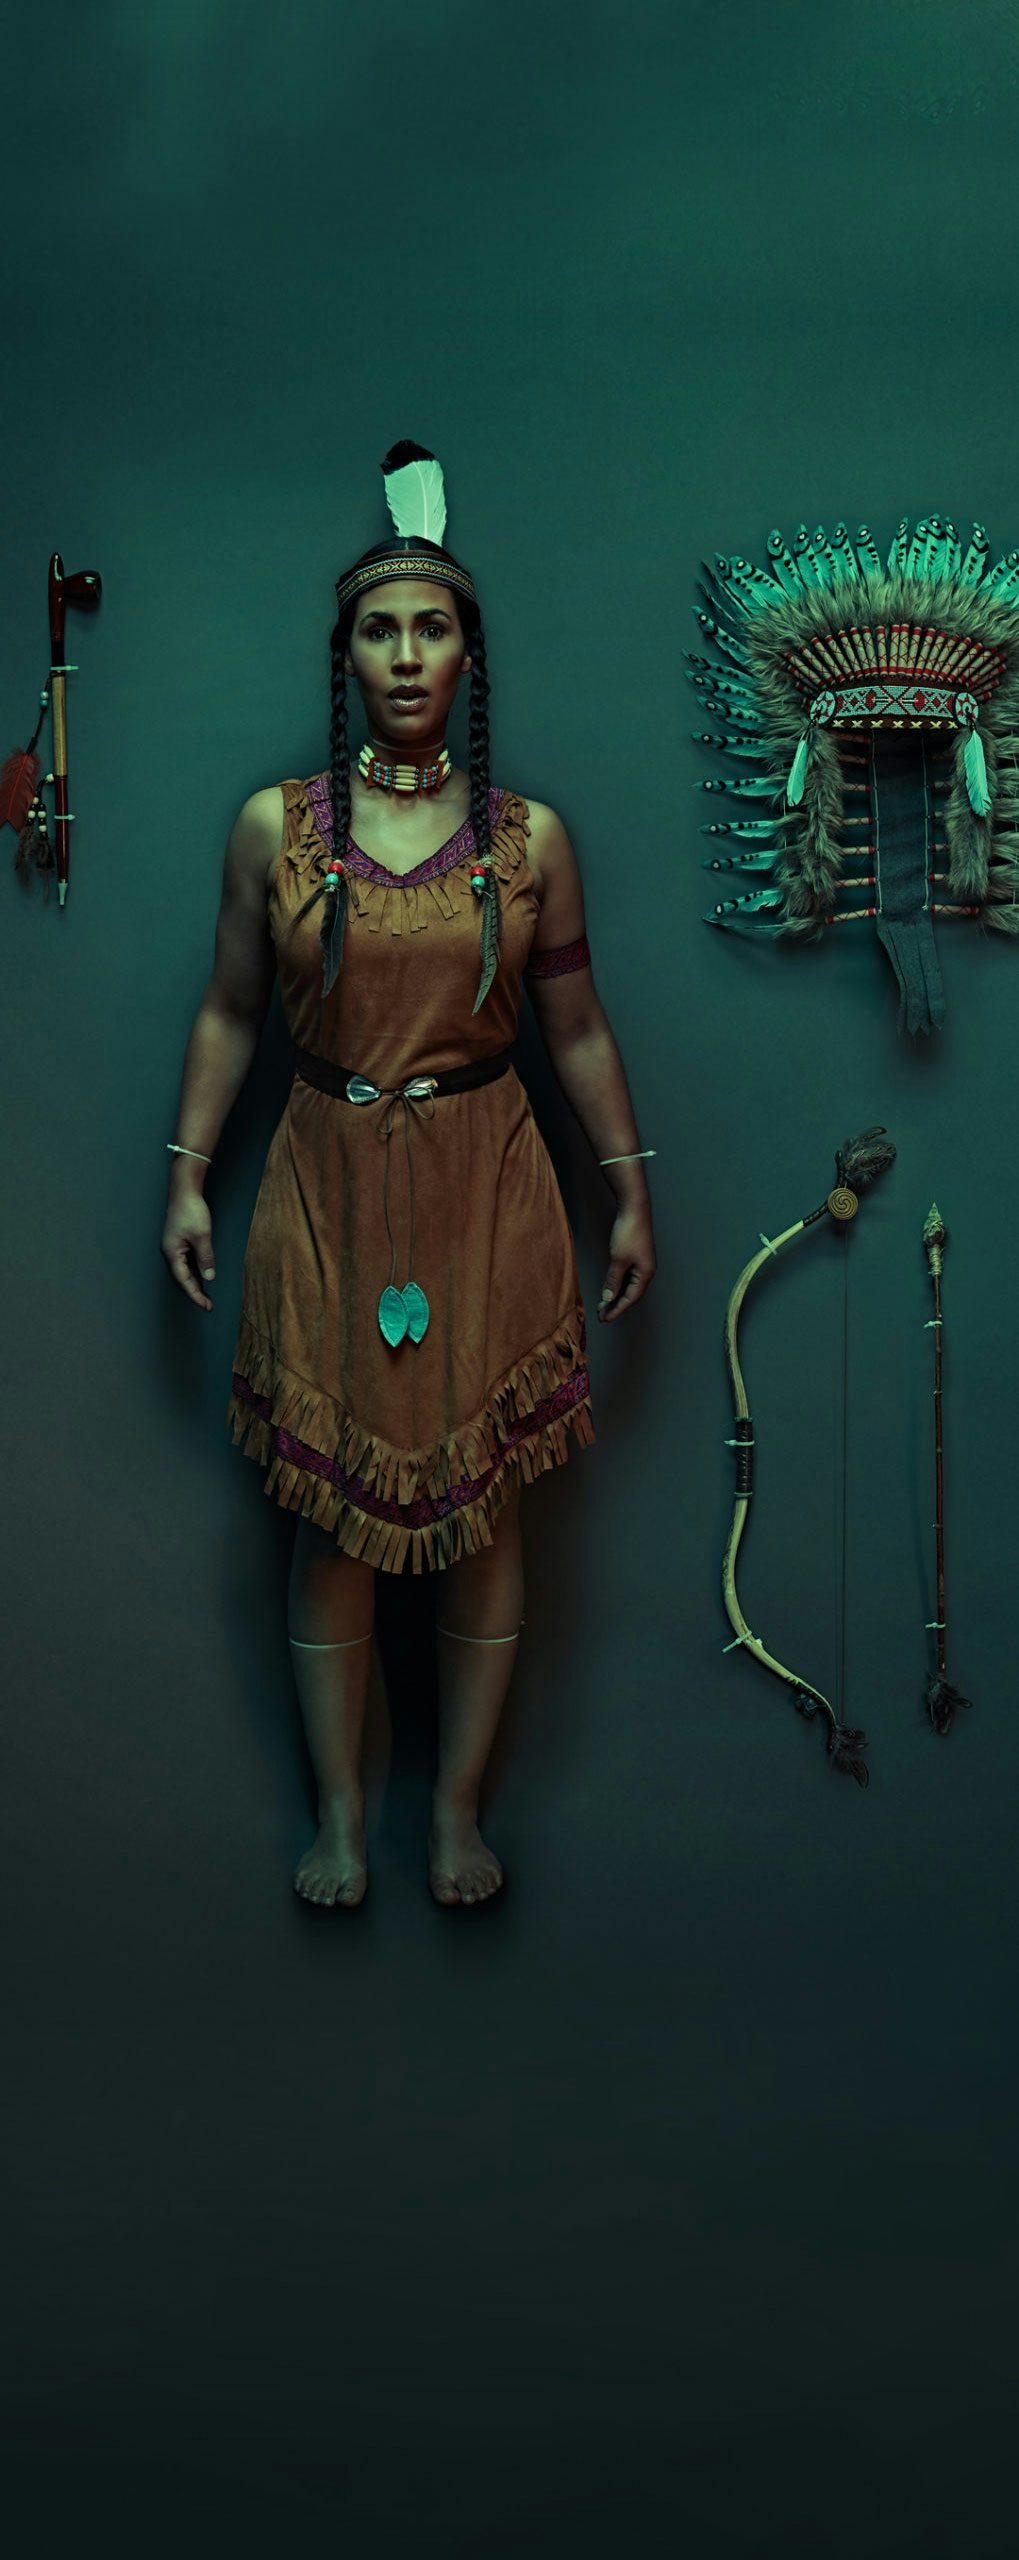 An American Indian woman dressed in traditional clothing standing in a dark room with American Indian accessories on display